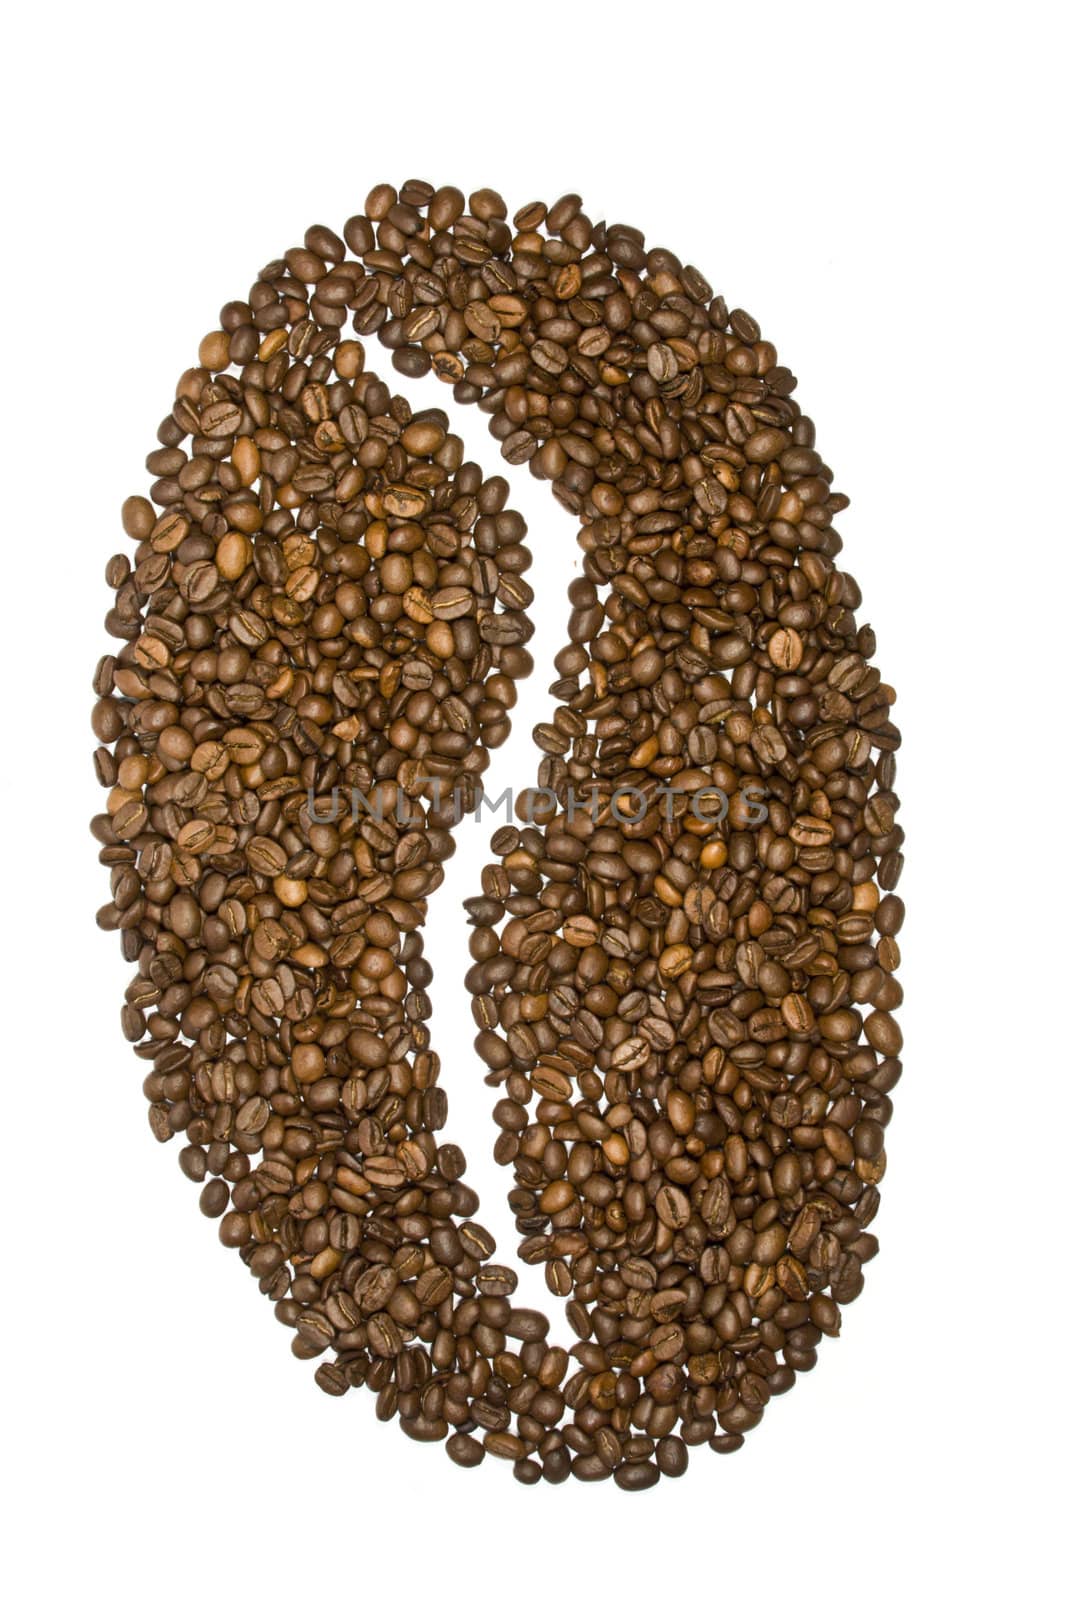 Coffee bean made of coffee beans on a white background